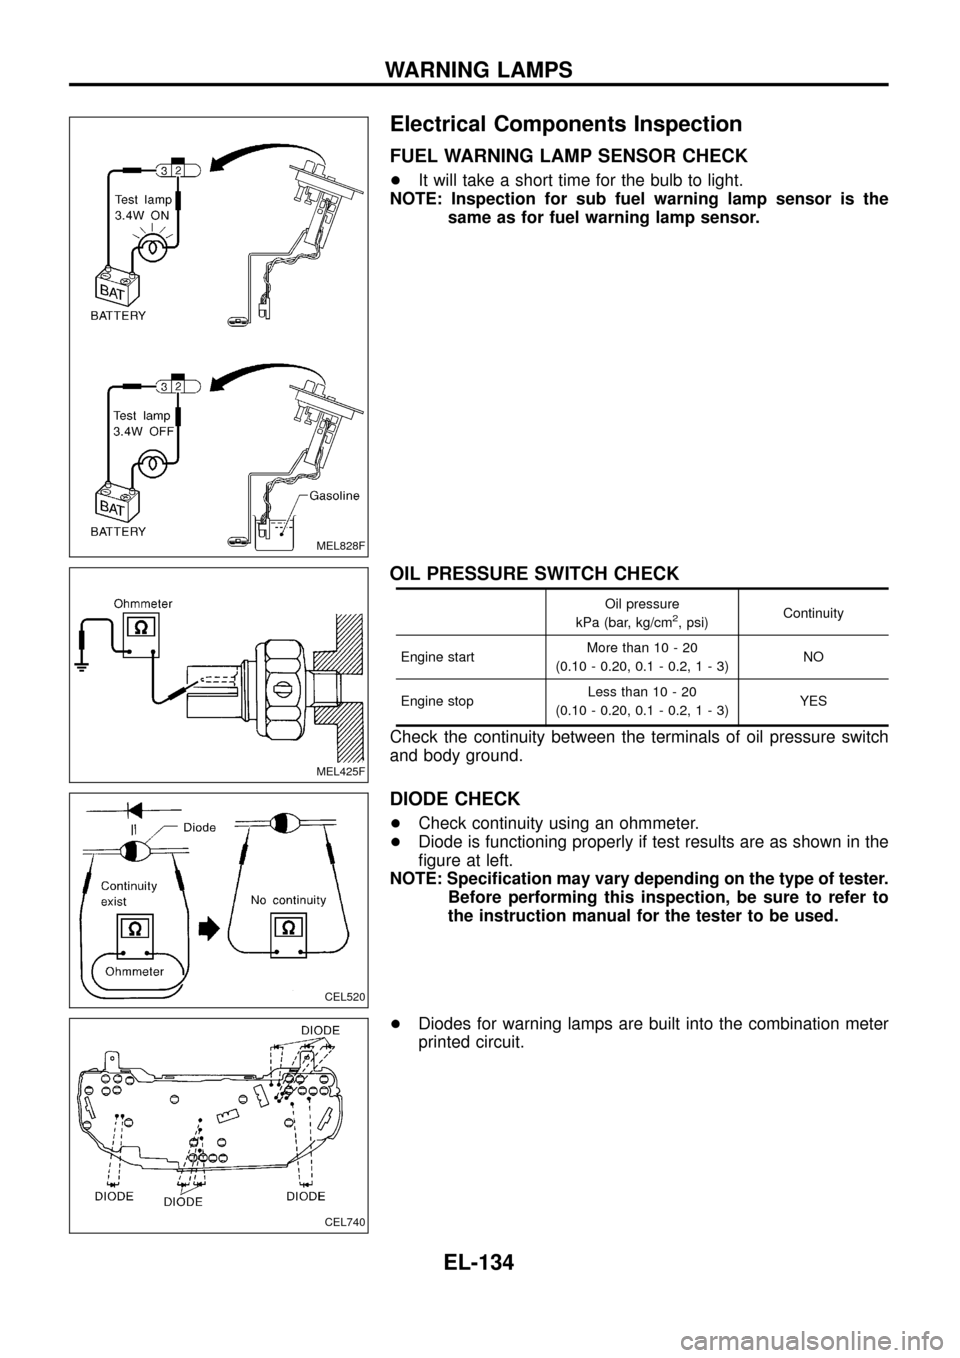 NISSAN PATROL 1998 Y61 / 5.G Electrical System User Guide Electrical Components Inspection
FUEL WARNING LAMP SENSOR CHECK
+It will take a short time for the bulb to light.
NOTE: Inspection for sub fuel warning lamp sensor is the
same as for fuel warning lamp